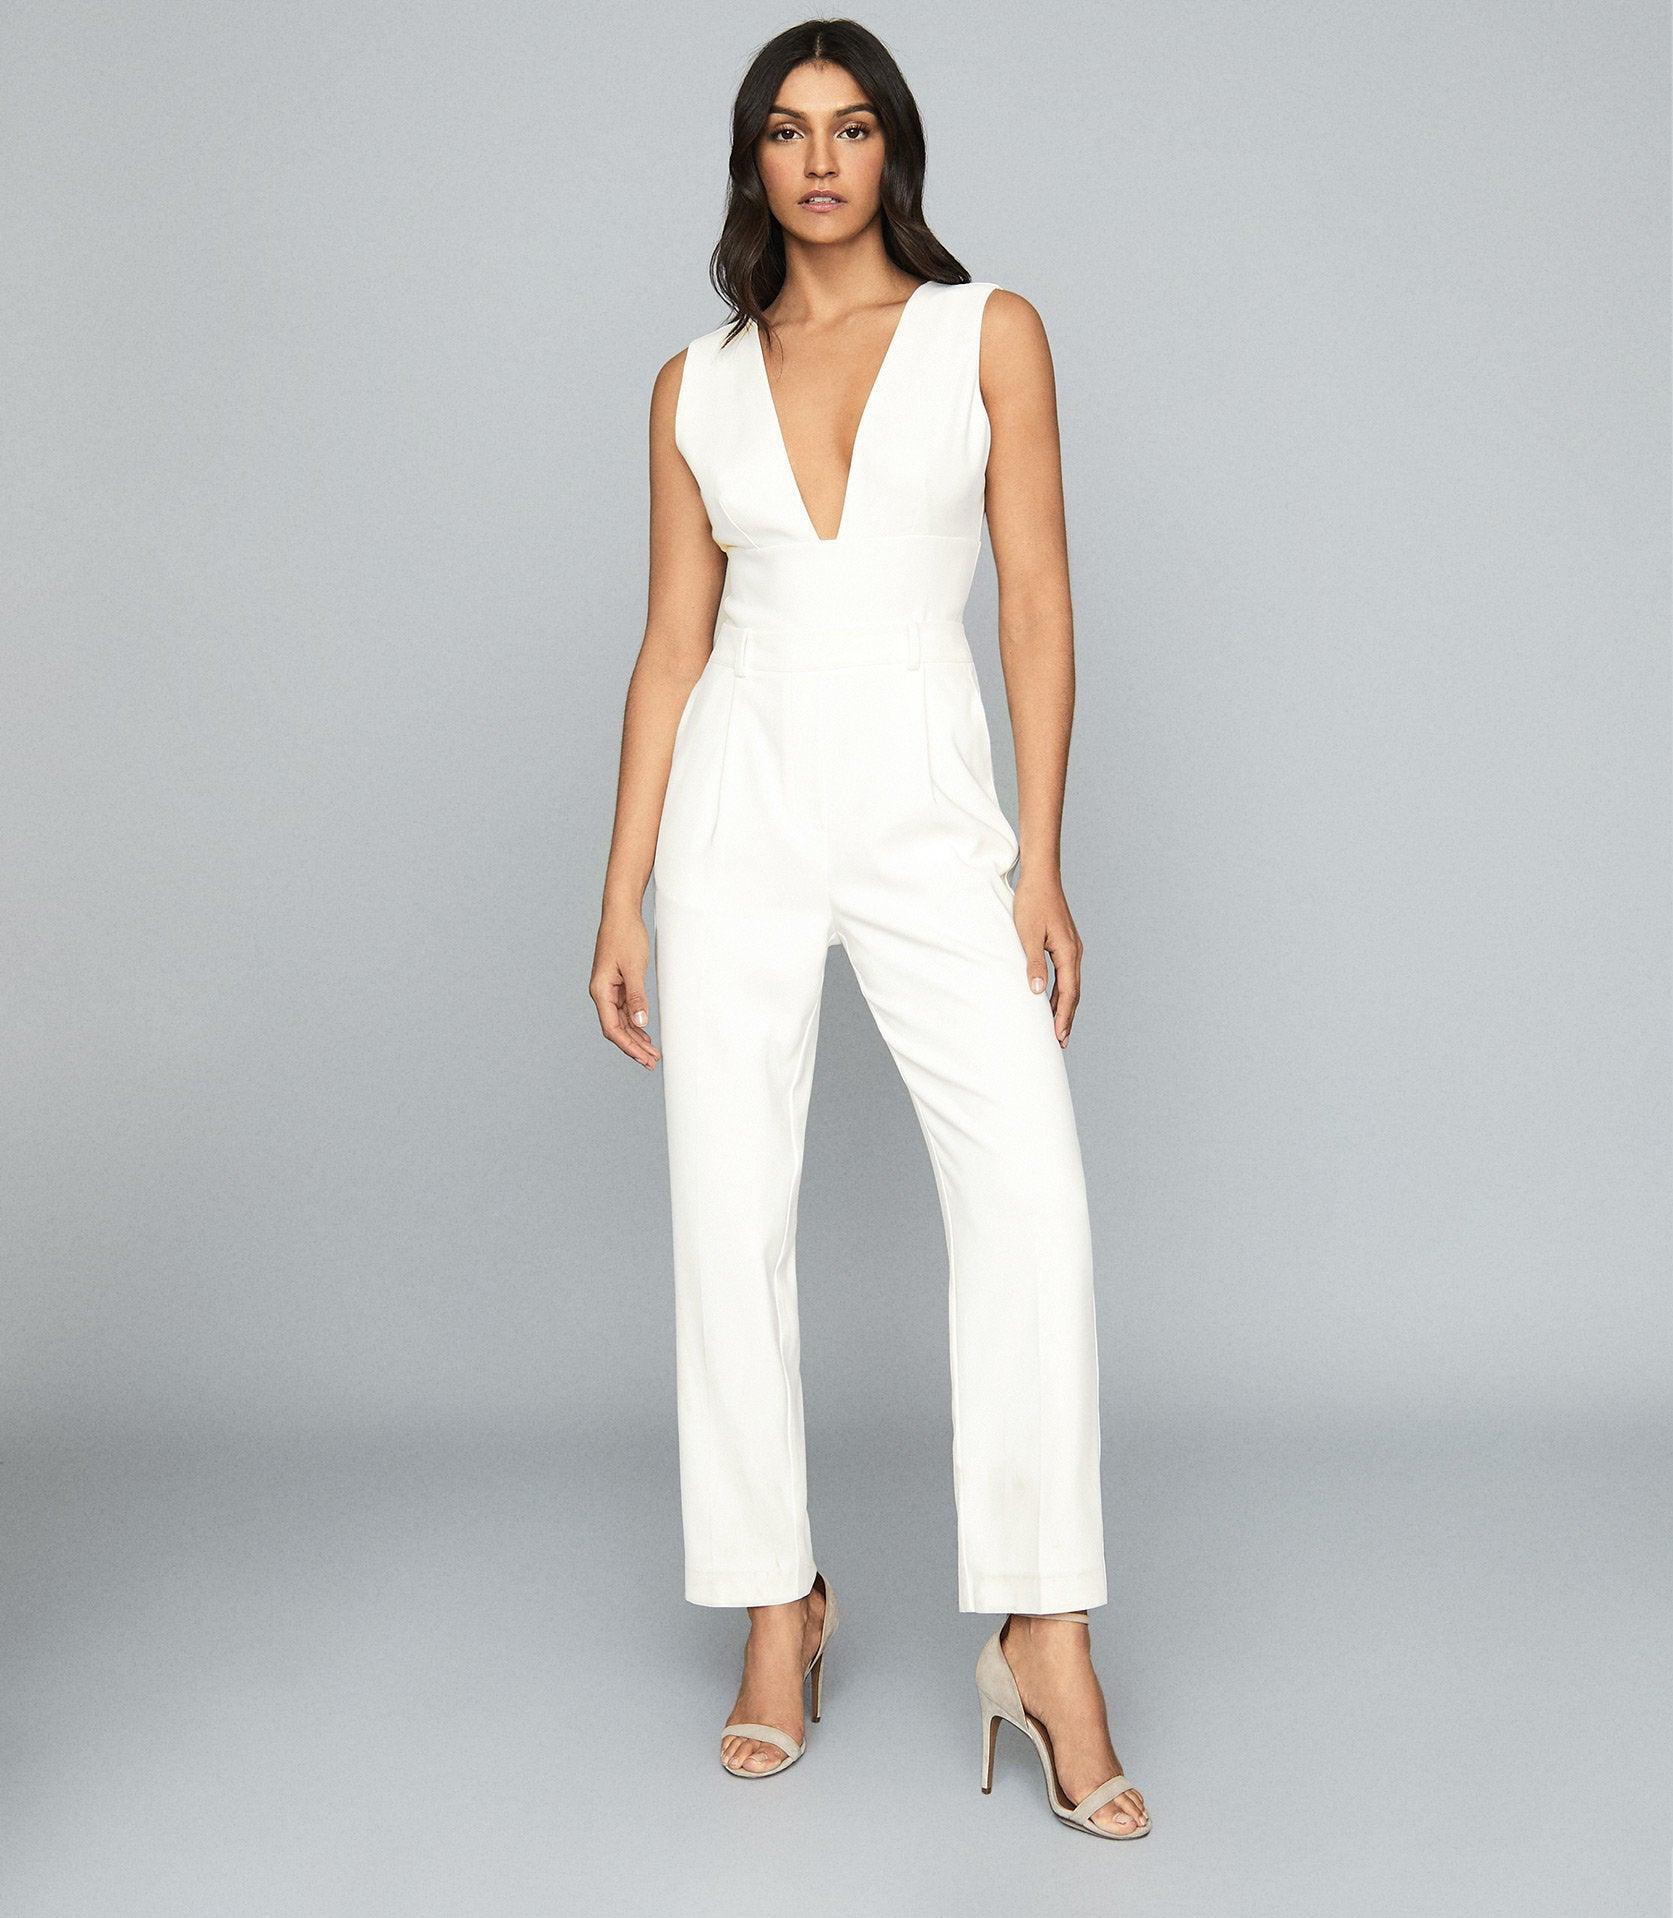 Reiss Synthetic Lina - Plunge Tailored Jumpsuit in White - Lyst